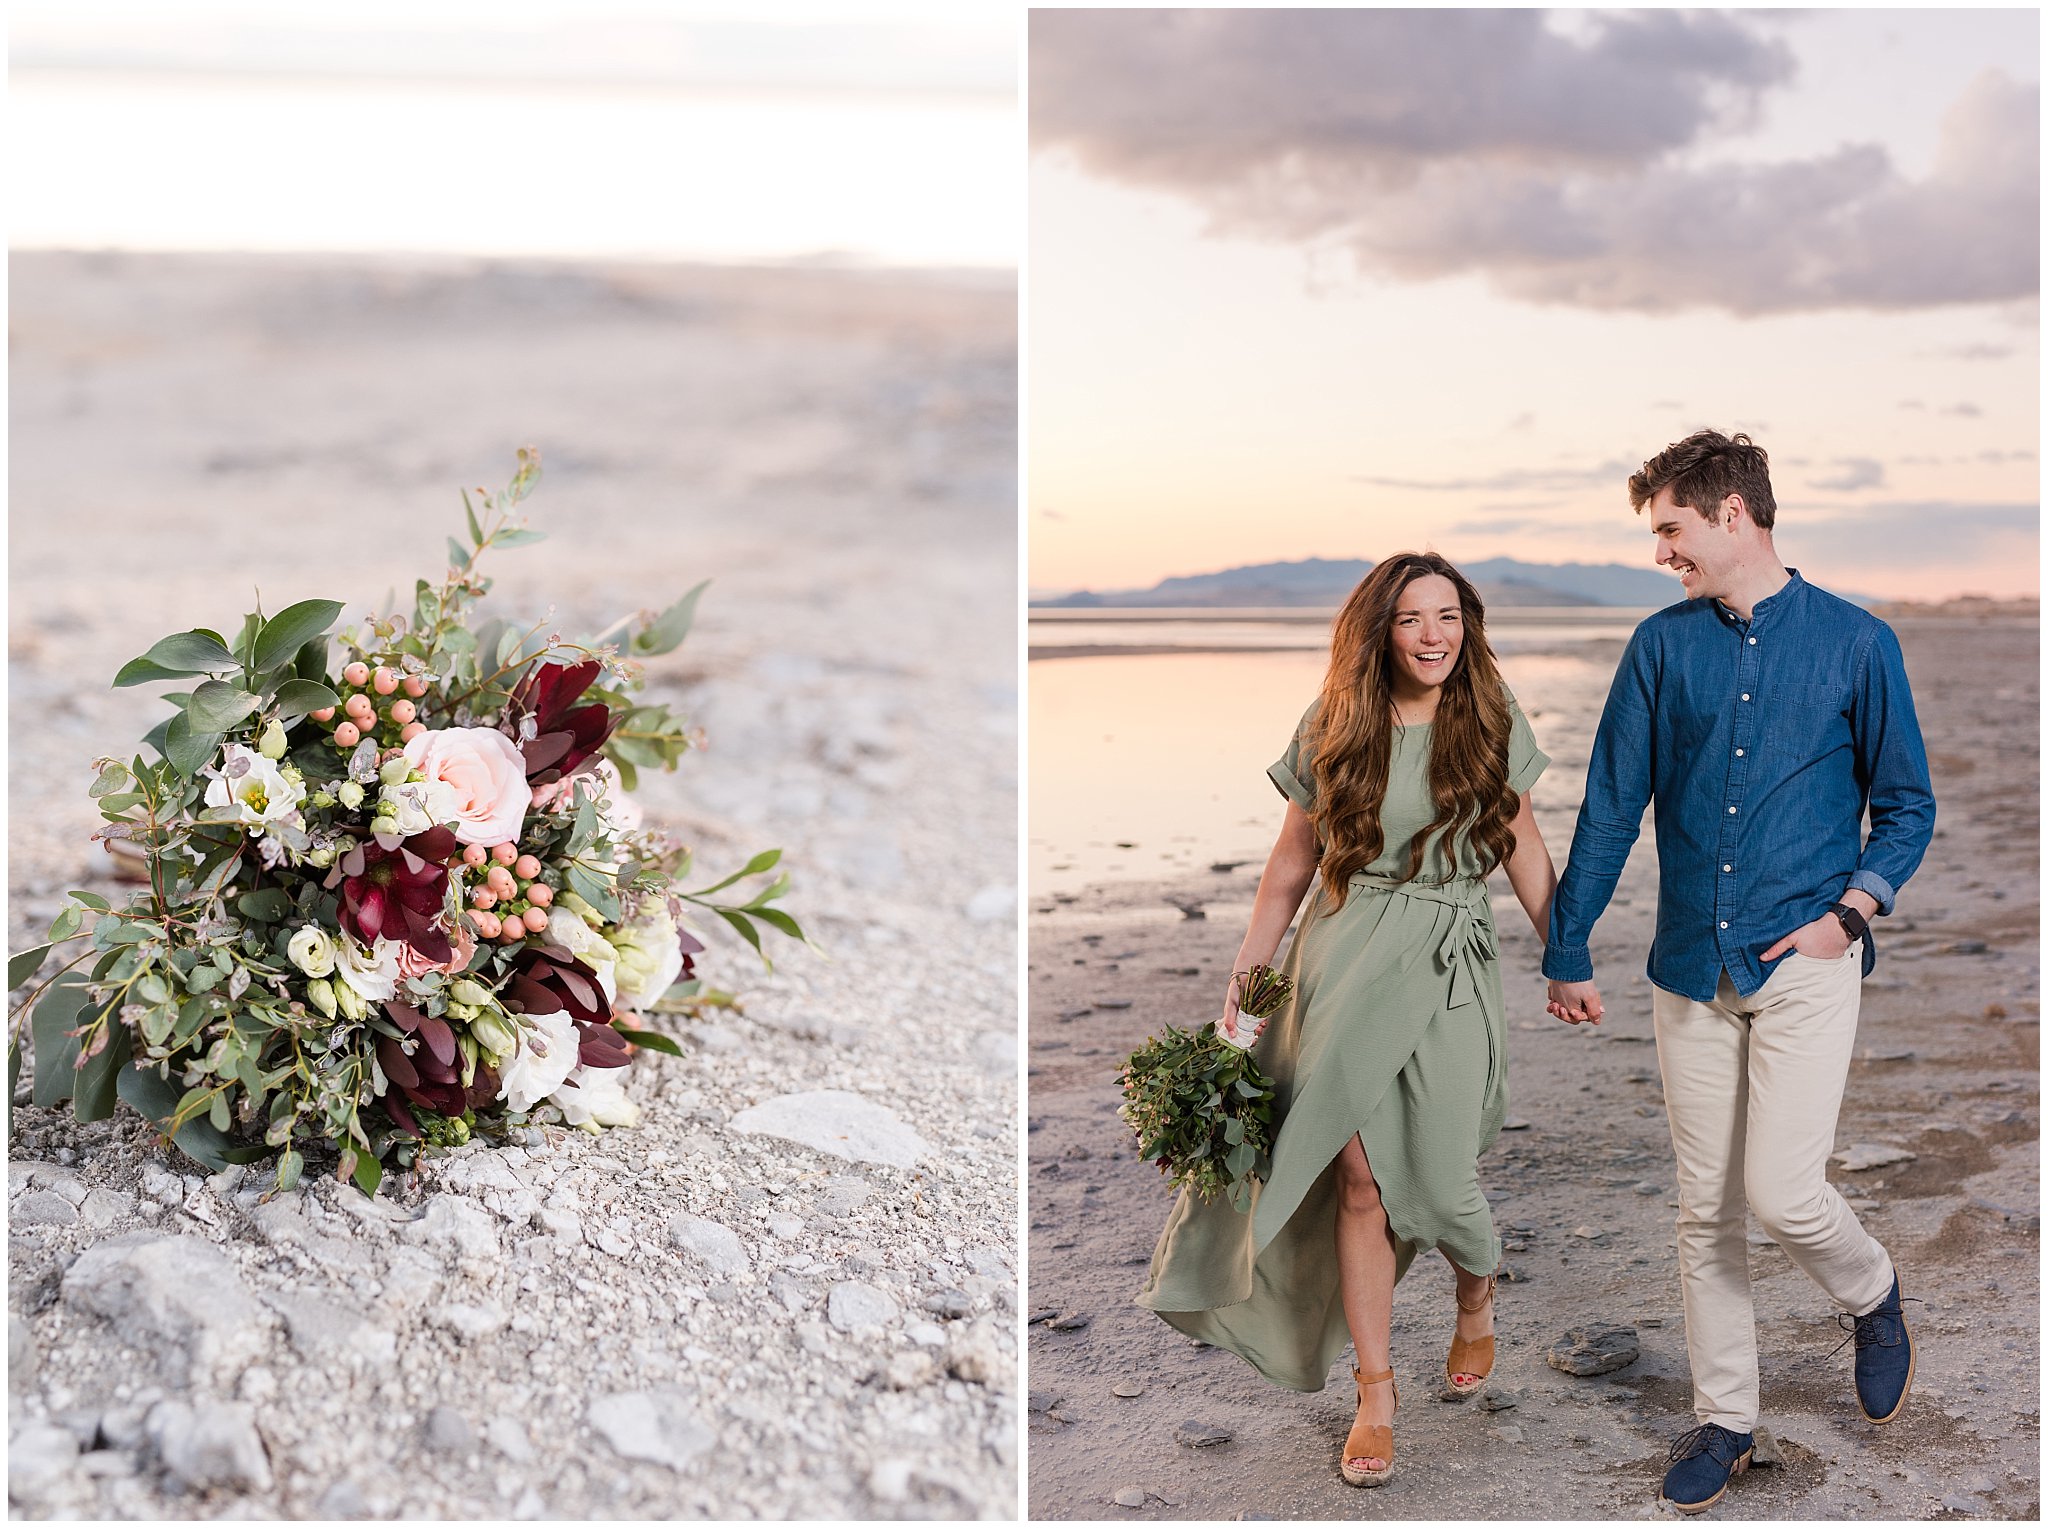 Couple walking on the beach at sunset during Antelope Island Engagement with bouquet | Antelope Island Engagements | Utah Wedding Photographers | Jessie and Dallin Photography